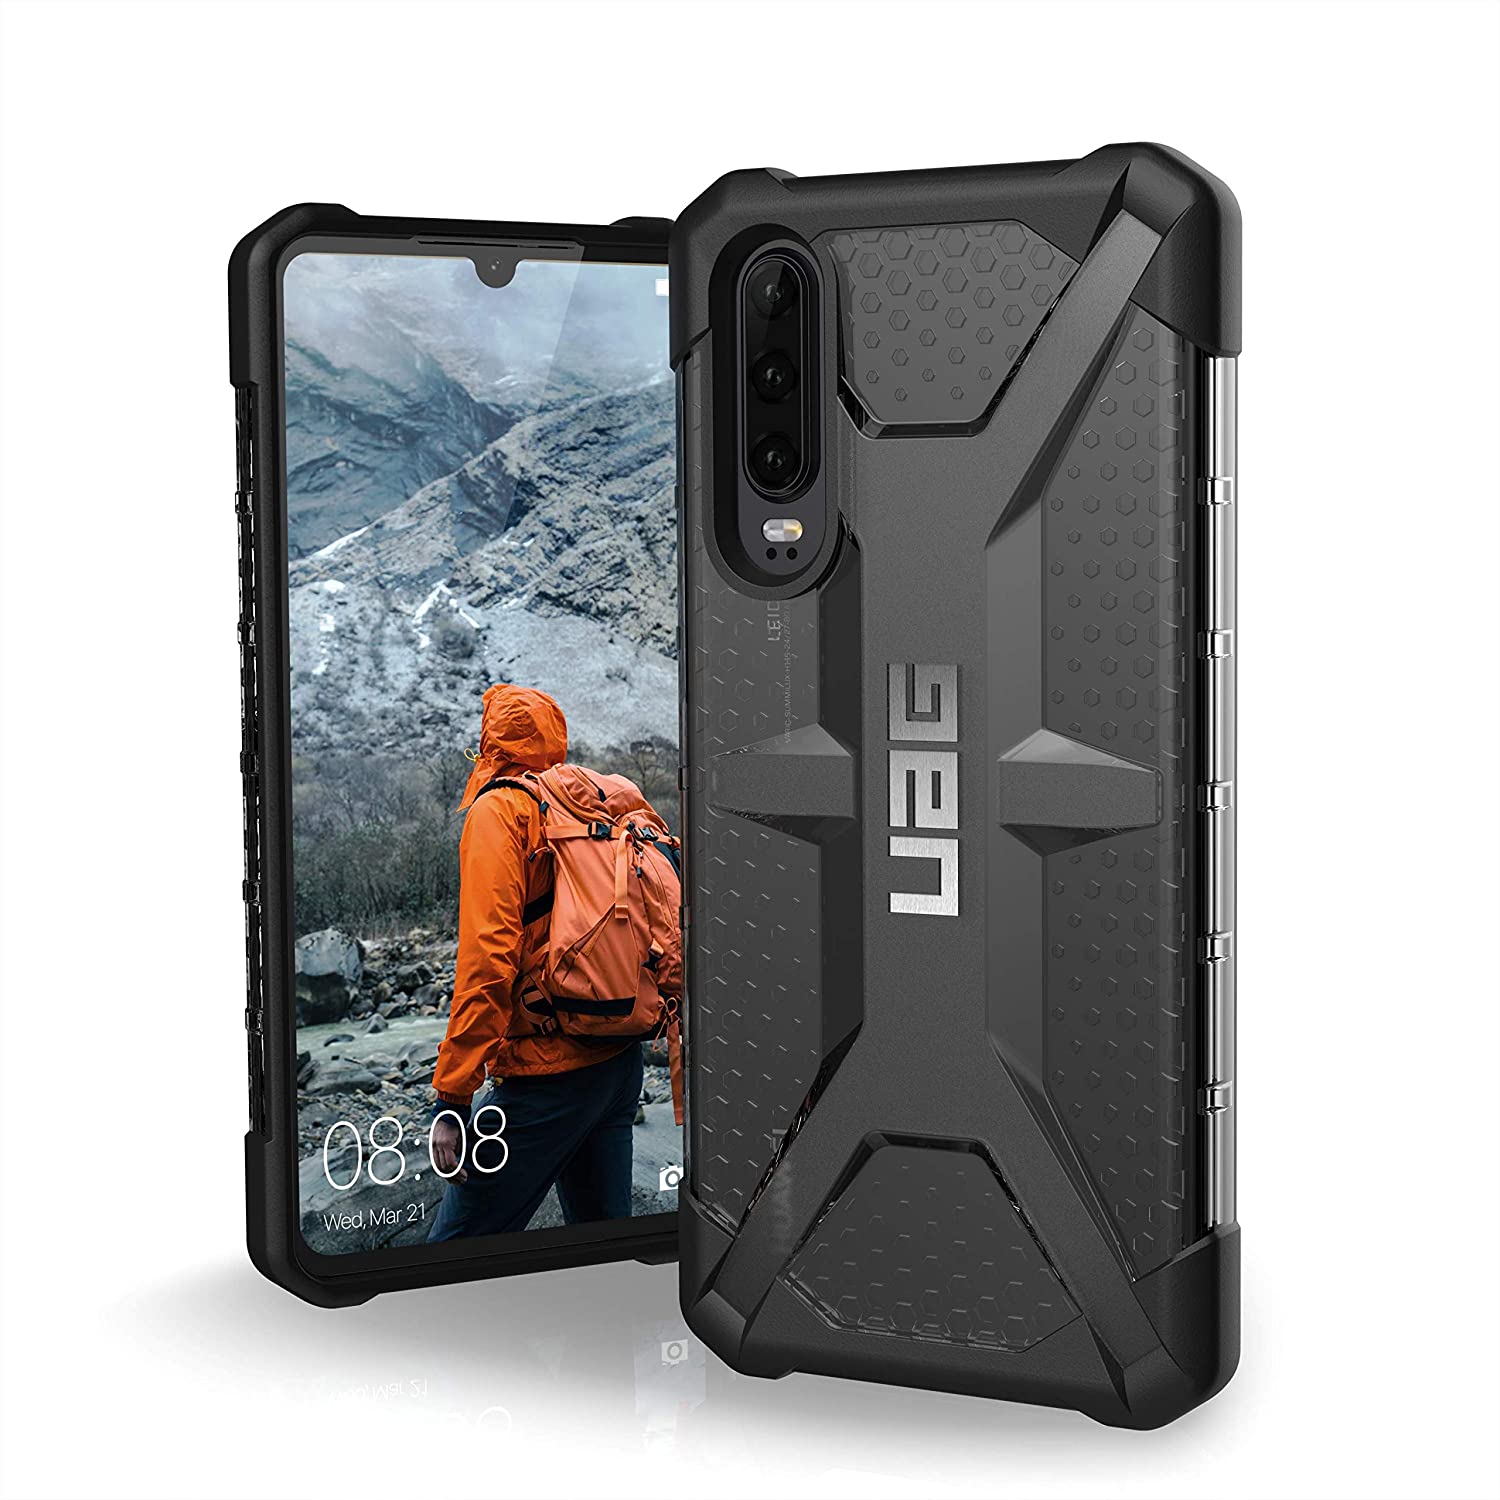 UAG Huawei P40 / P30 Case Plasma [Ash] Rugged Translucent Ultra-Thin Military Drop Tested Protective Cover